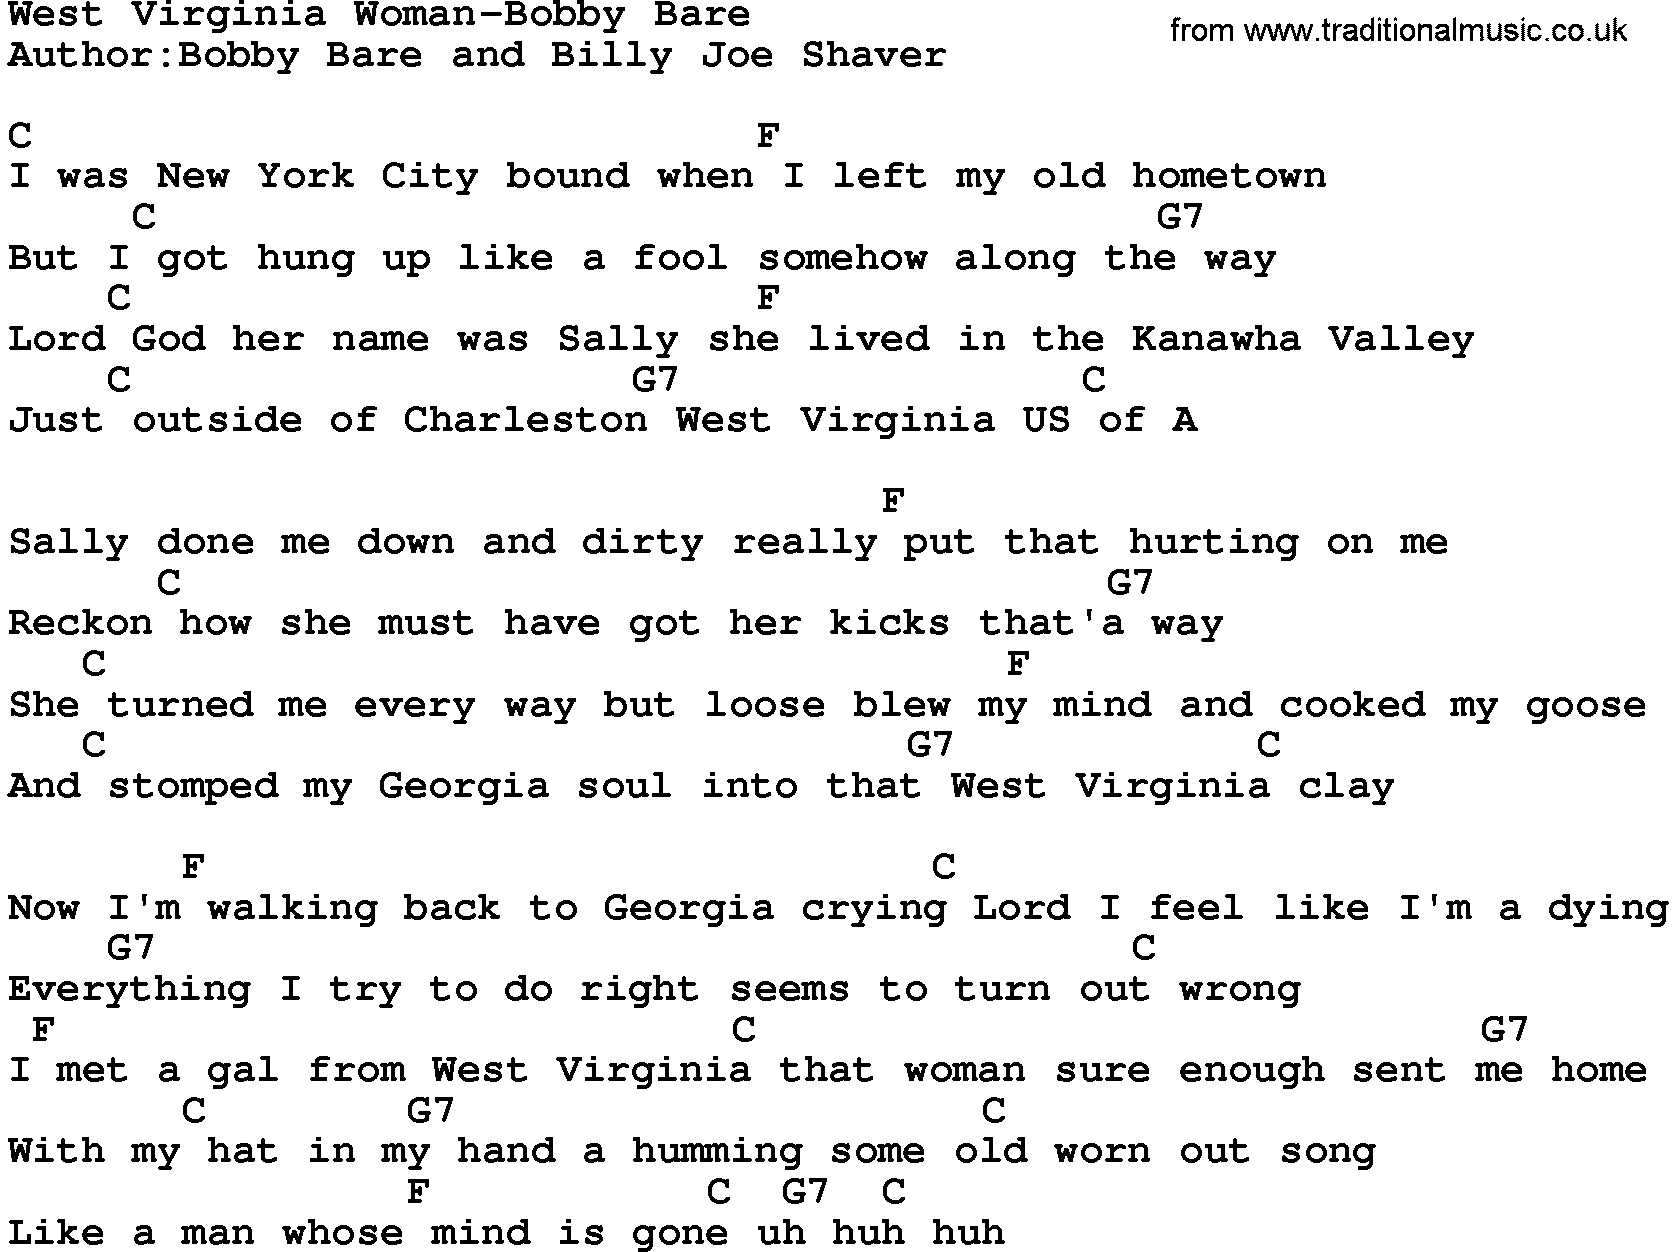 Country music song: West Virginia Woman-Bobby Bare lyrics and chords